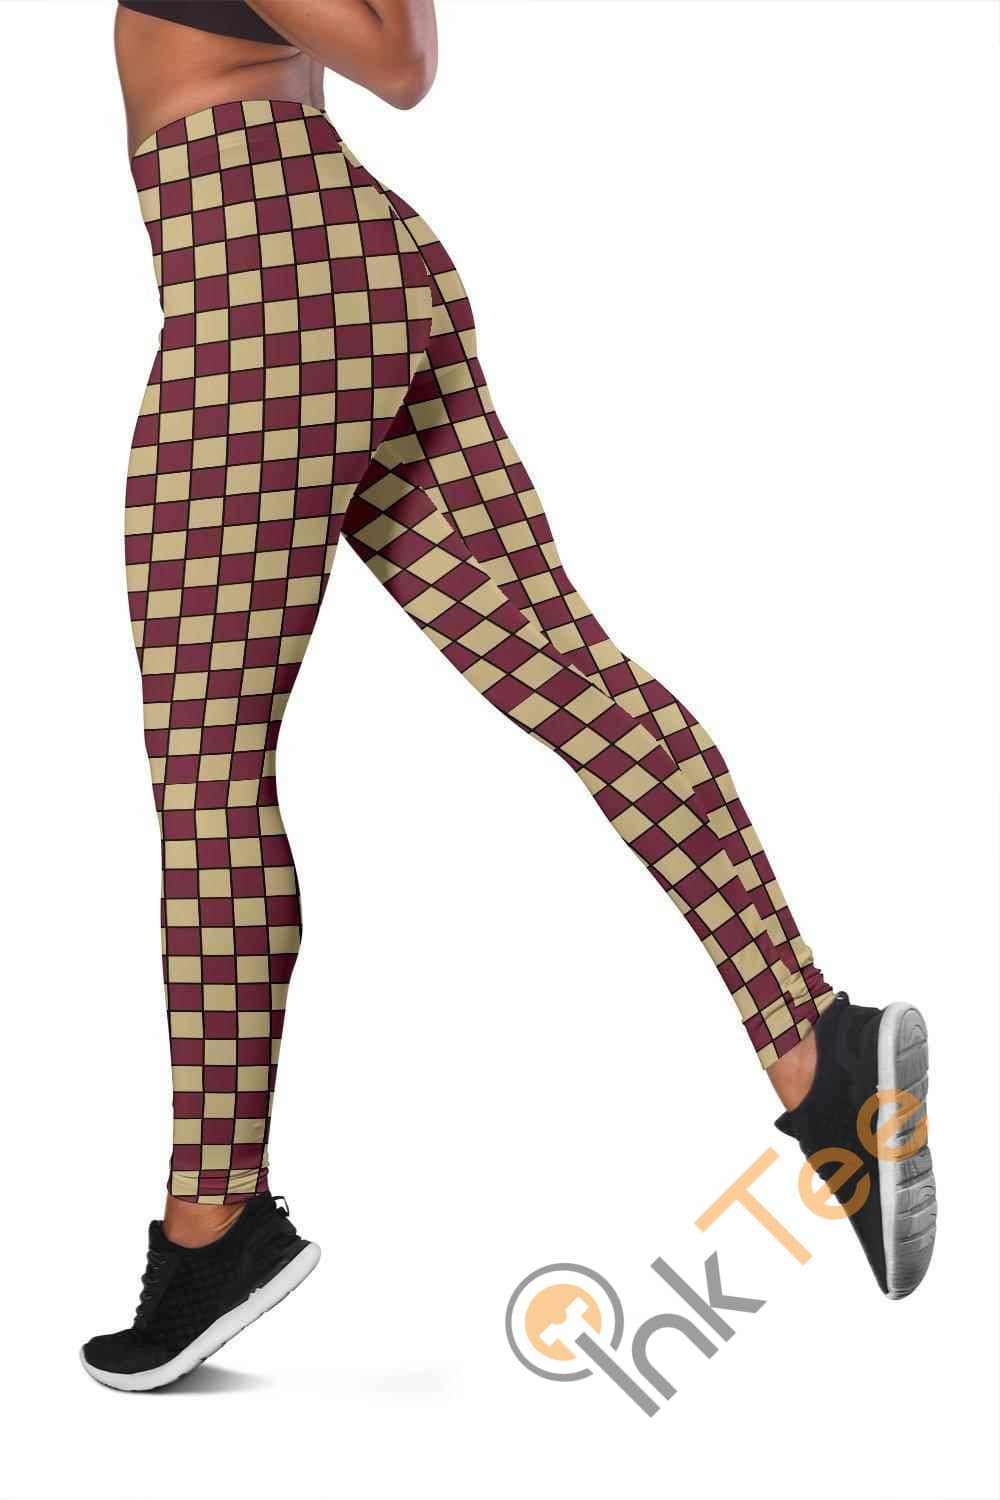 Inktee Store - Florida State Seminoles Fan Inspired 3D All Over Print For Yoga Fitness Checkers Women'S Leggings Image